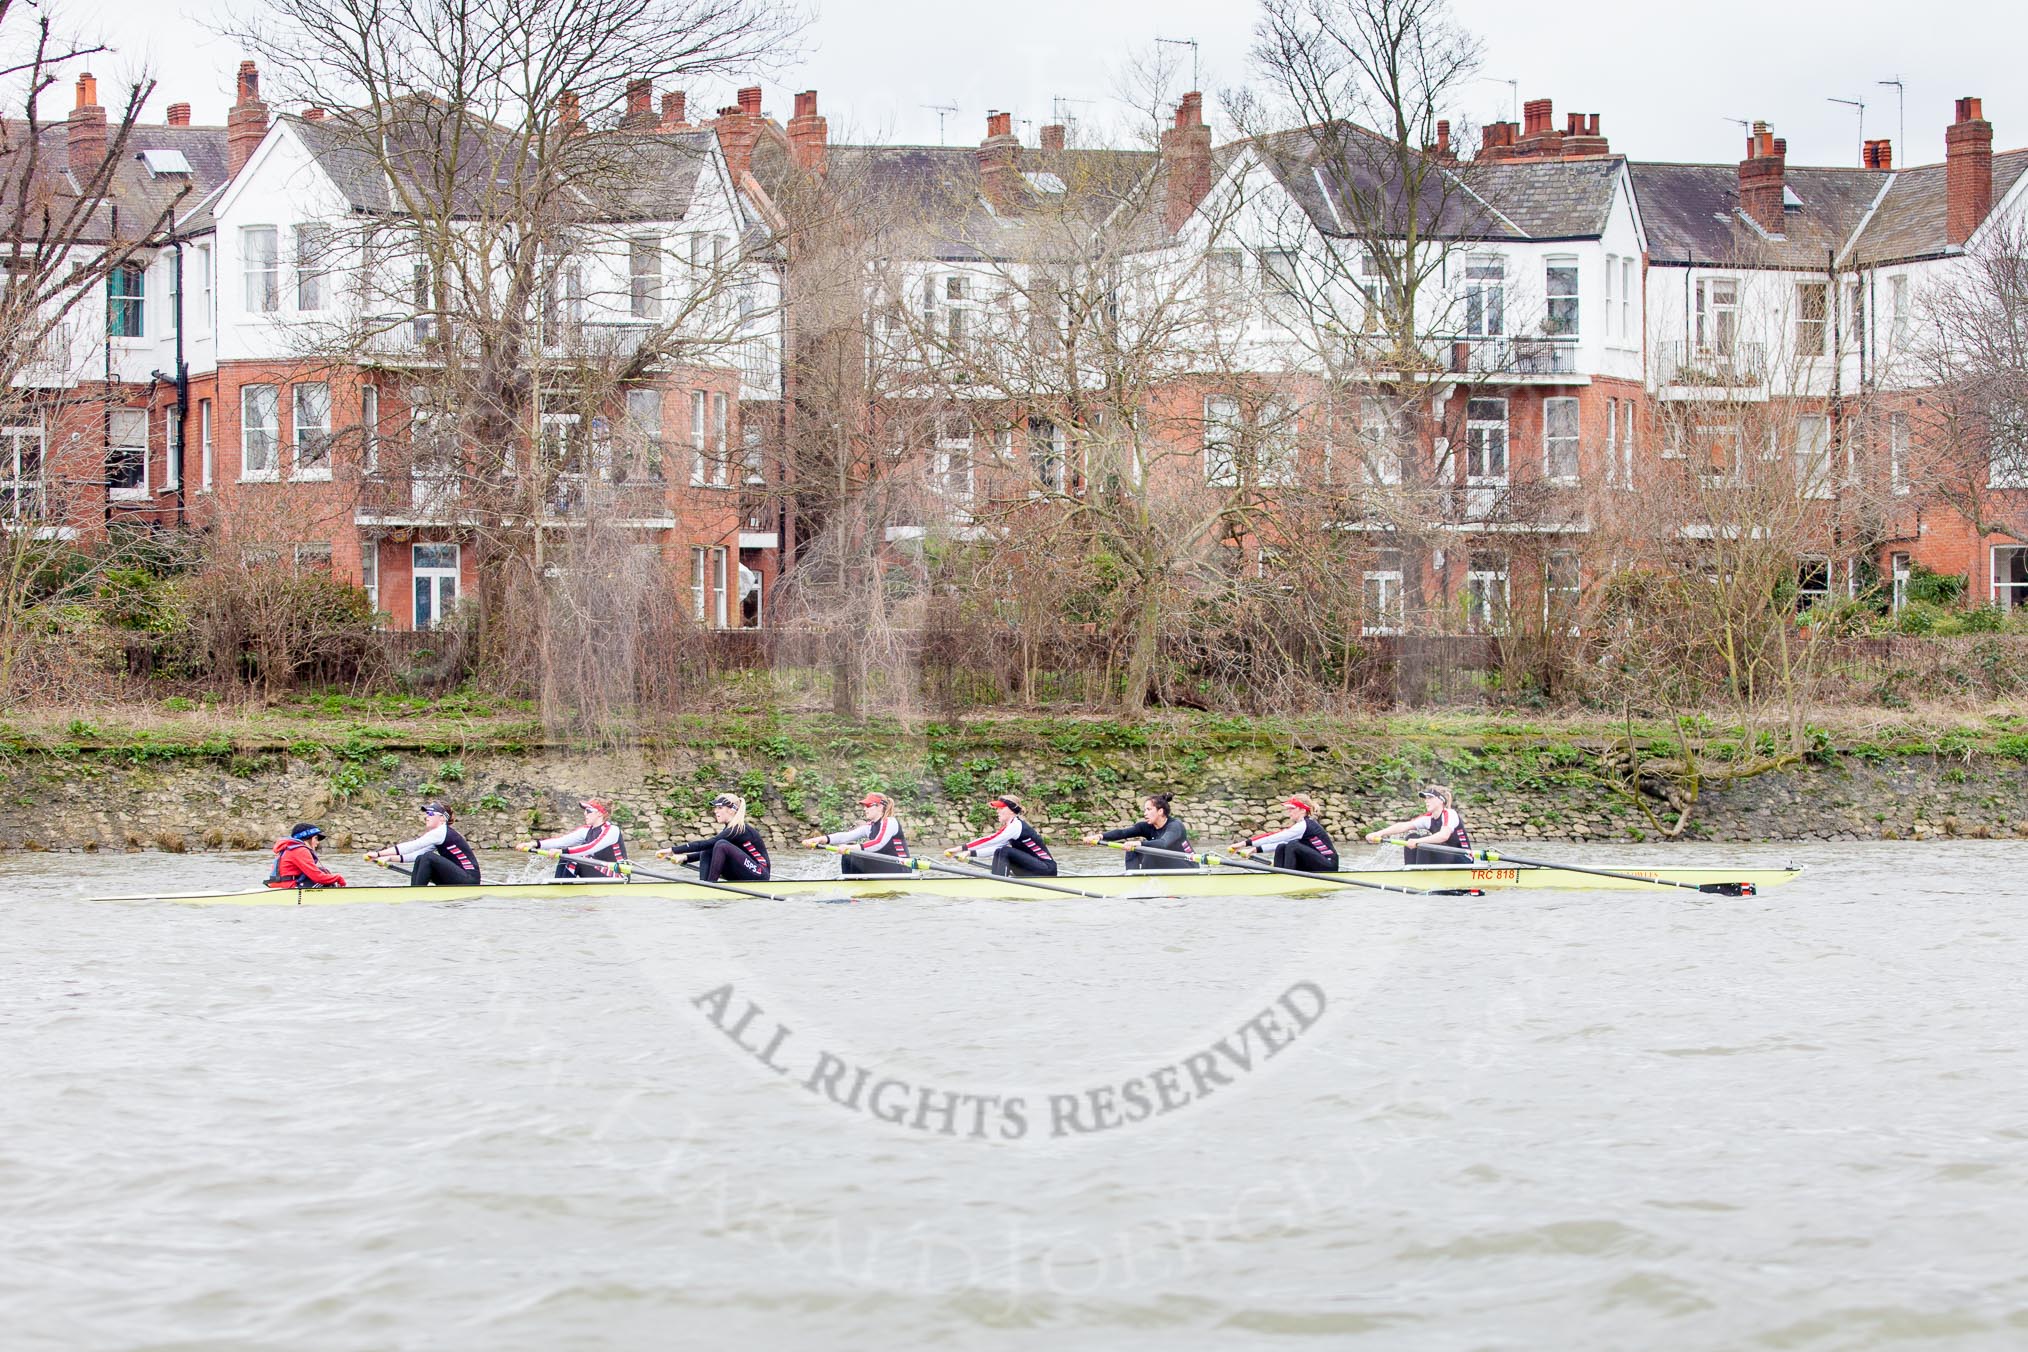 The Boat Race season 2014 - fixture CUWBC vs Thames RC: The Thames RC boat between Harrods Depository and Hammersmith Bridge..




on 02 March 2014 at 13:17, image #122